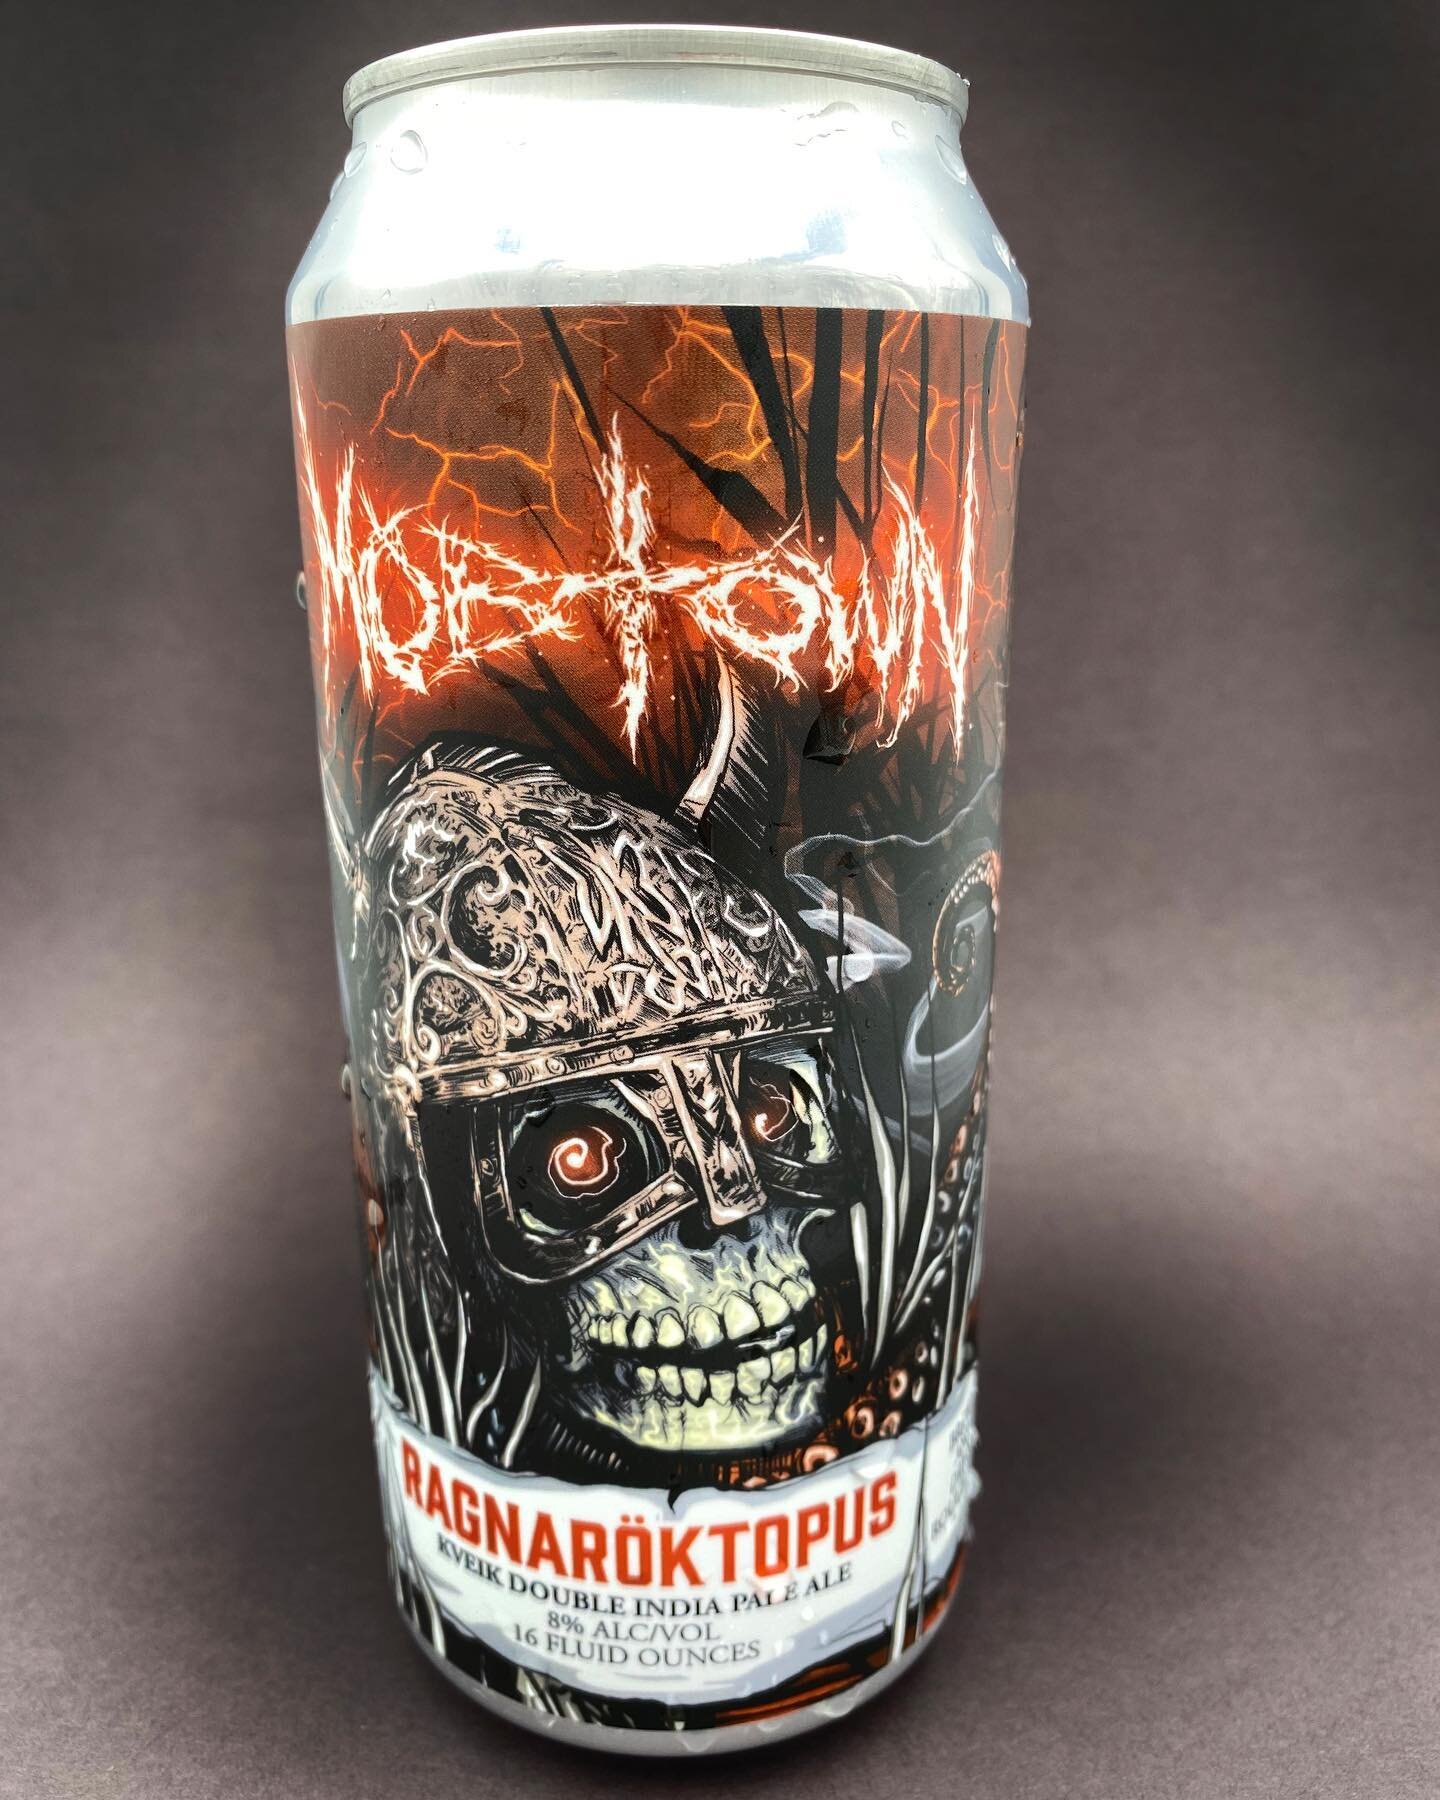 Here&rsquo;s the latest of the Octopus series I&rsquo;ve designed for my friends at @mobtownbrewing 
Ragnar&ouml;ktopus is a double IPA clocking in at 8%. Swing by and grab some! #marylandcraftbeer